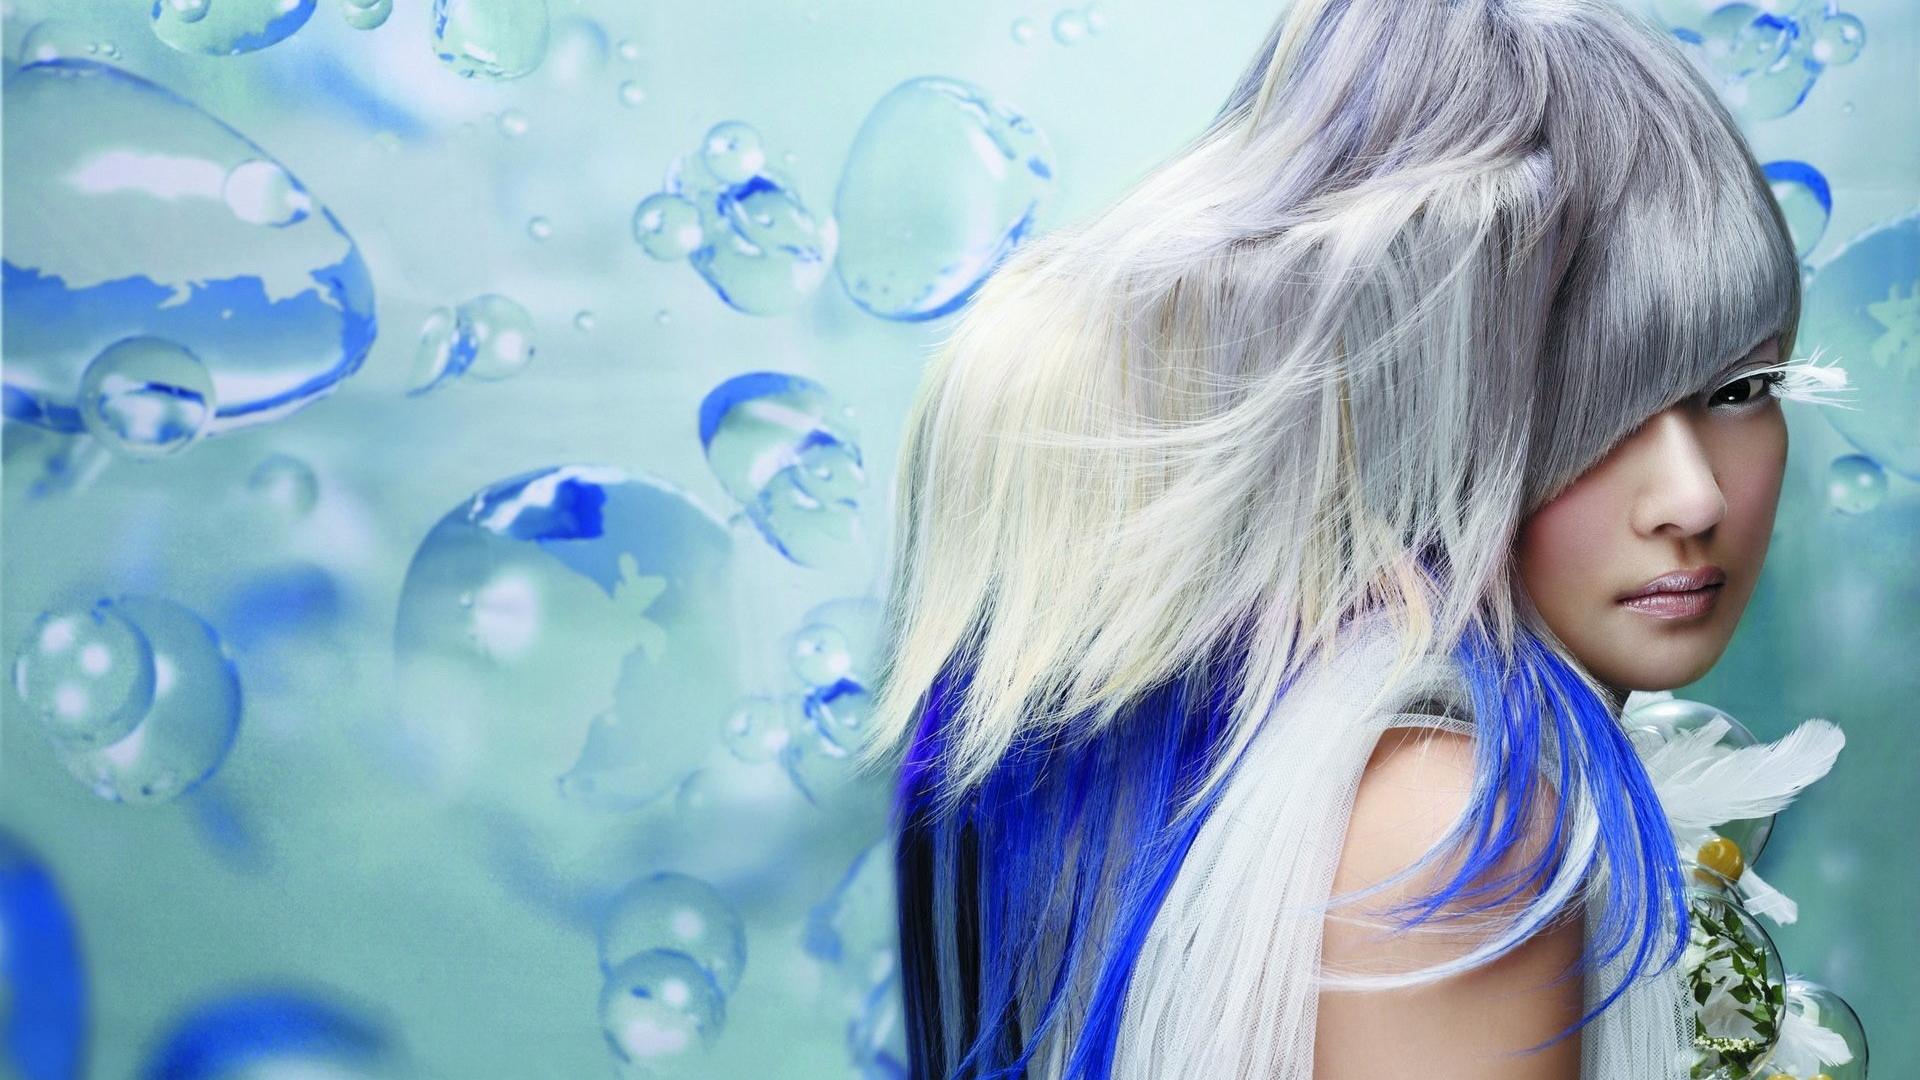 8. "Asian beauty influencers with blue and silver hair" - wide 5